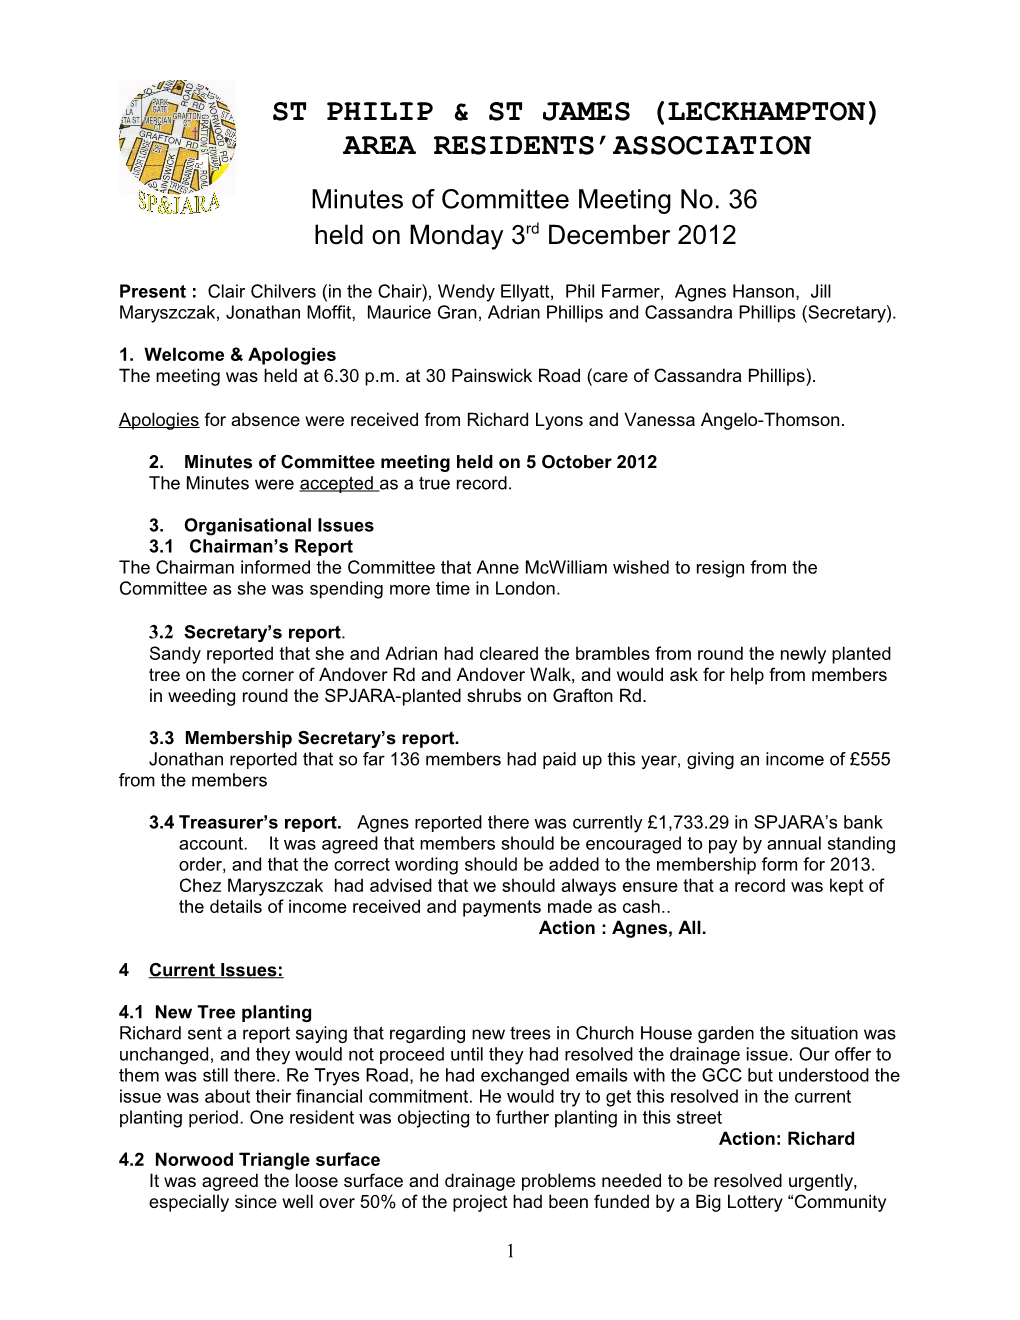 Minutes of Committee Meeting No. 36